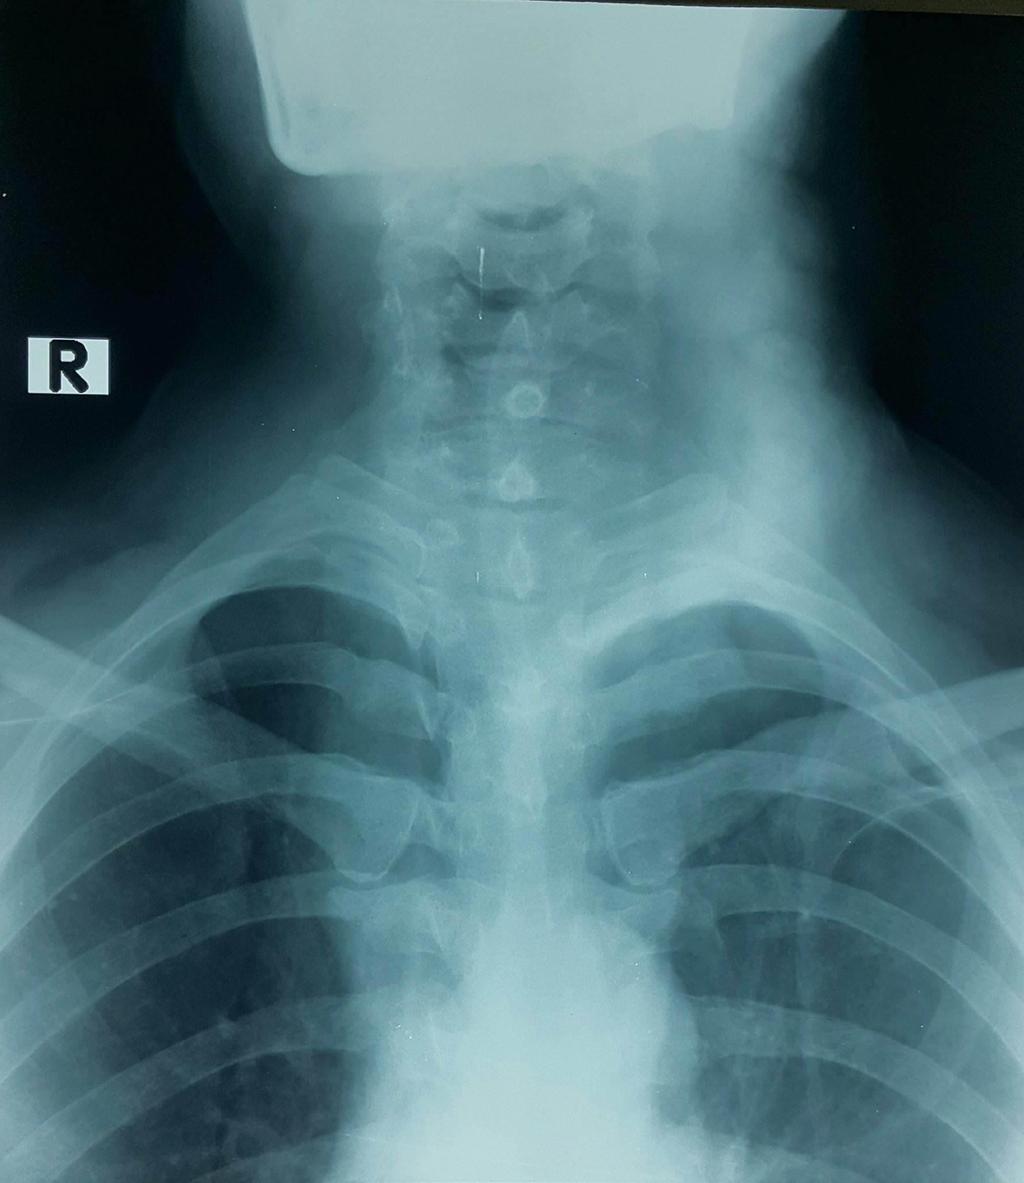 Chest Xray was ordered as shown in Figure 2.